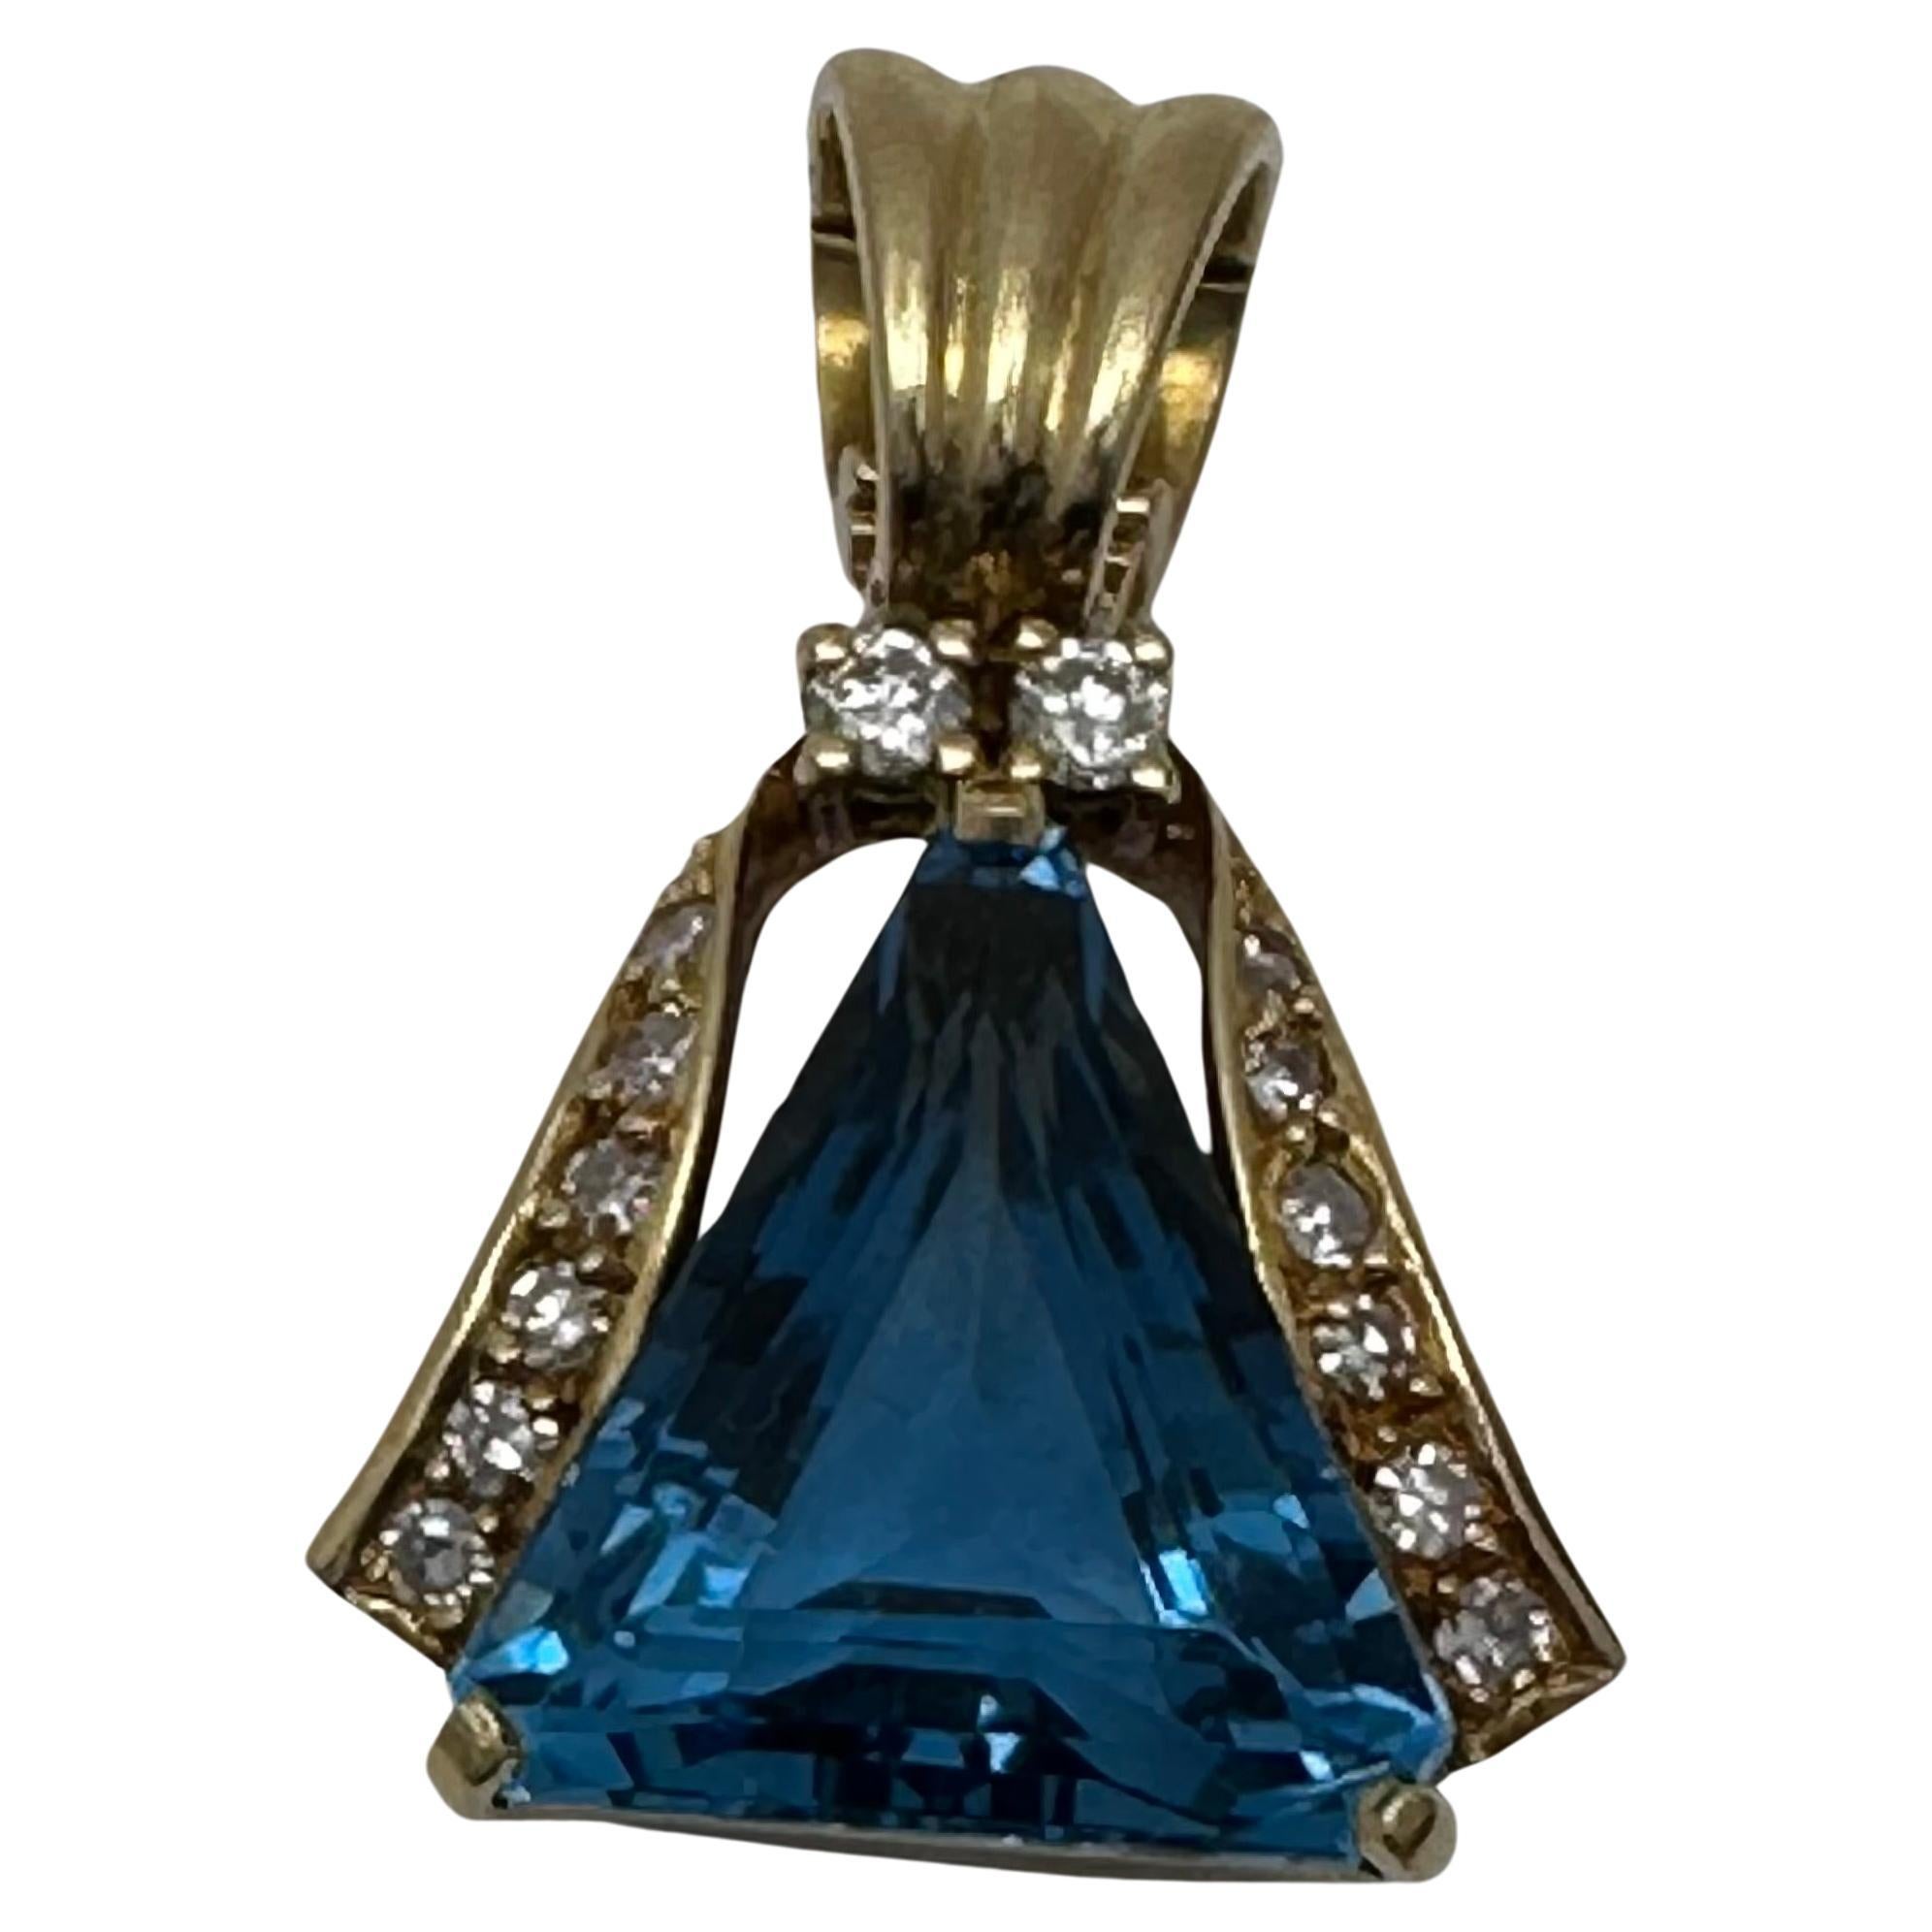 18k Yellow Gold 13mm x 15mm Triangular London Blue Topaz with 14 Diamonds / Pendant / Enhancer
Measurement are approx.

Blue Topaz Meaning:

This vivacious blue gemstone is known as the stone of clarity. The Blue Topaz meaning allows you to channel